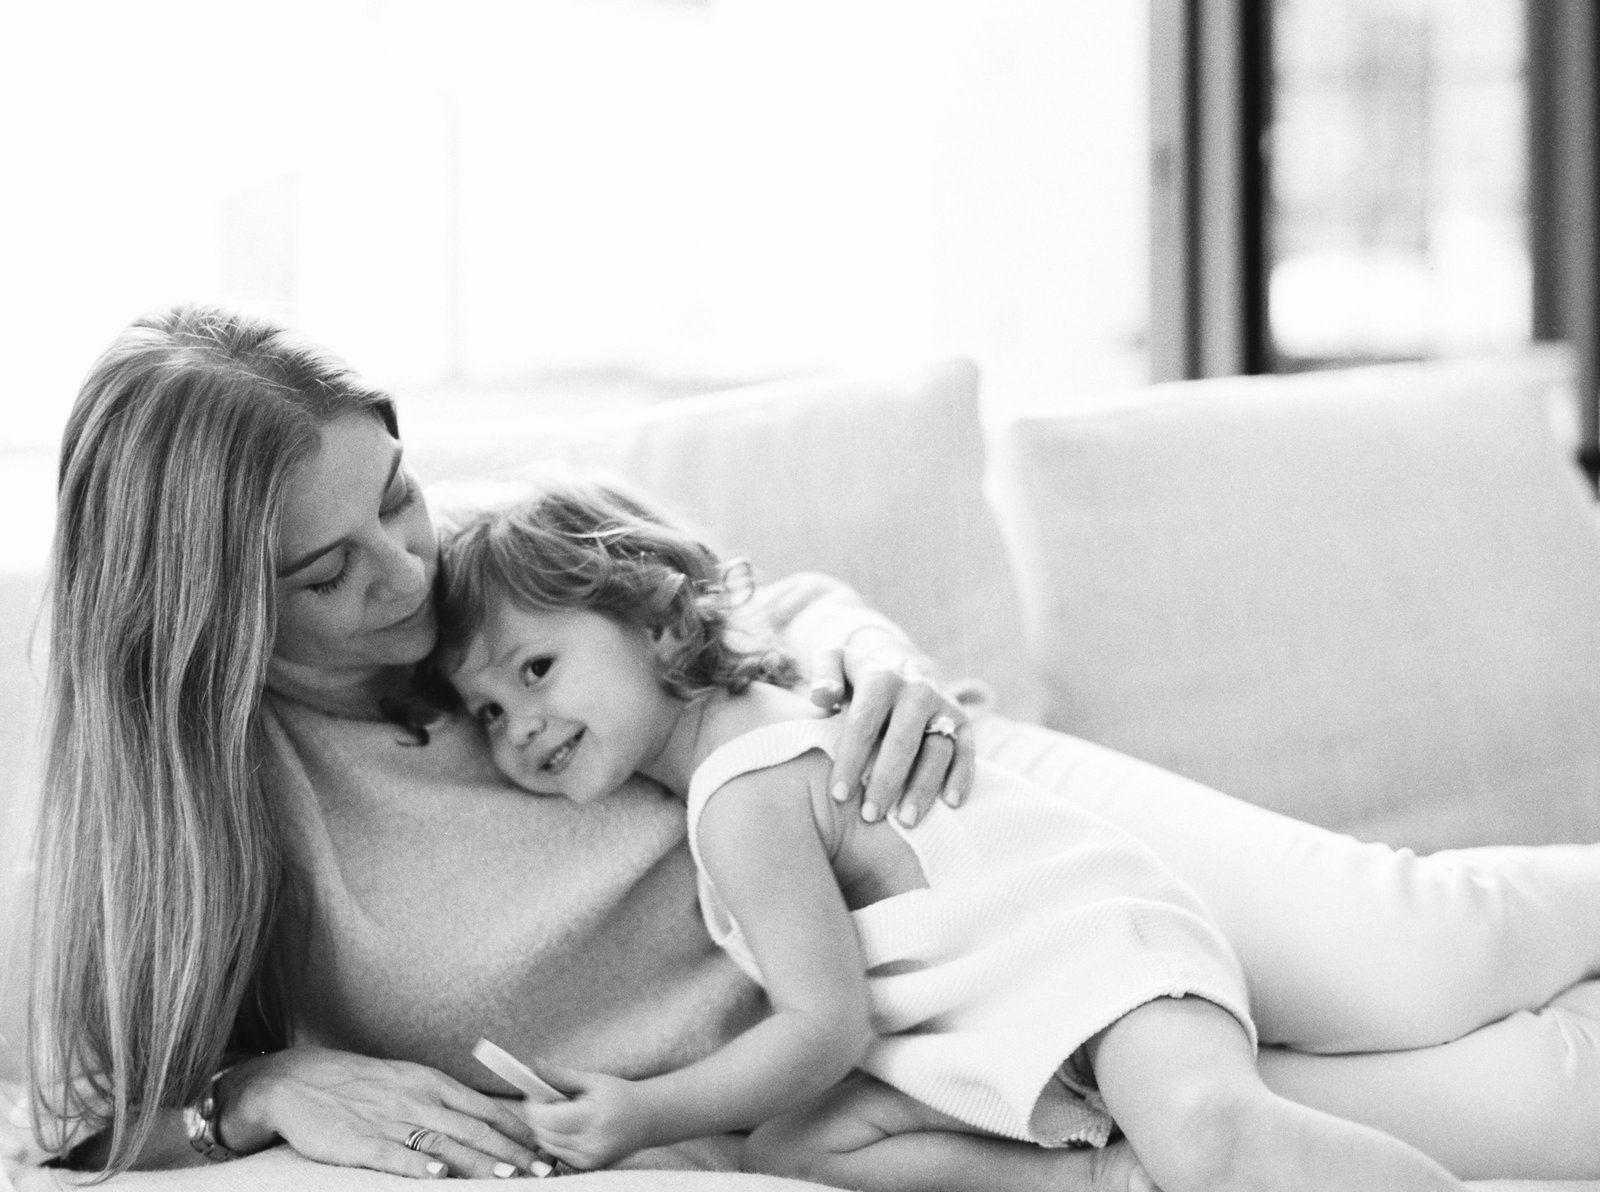 Mom and daughter on the couch smiling for family photograph